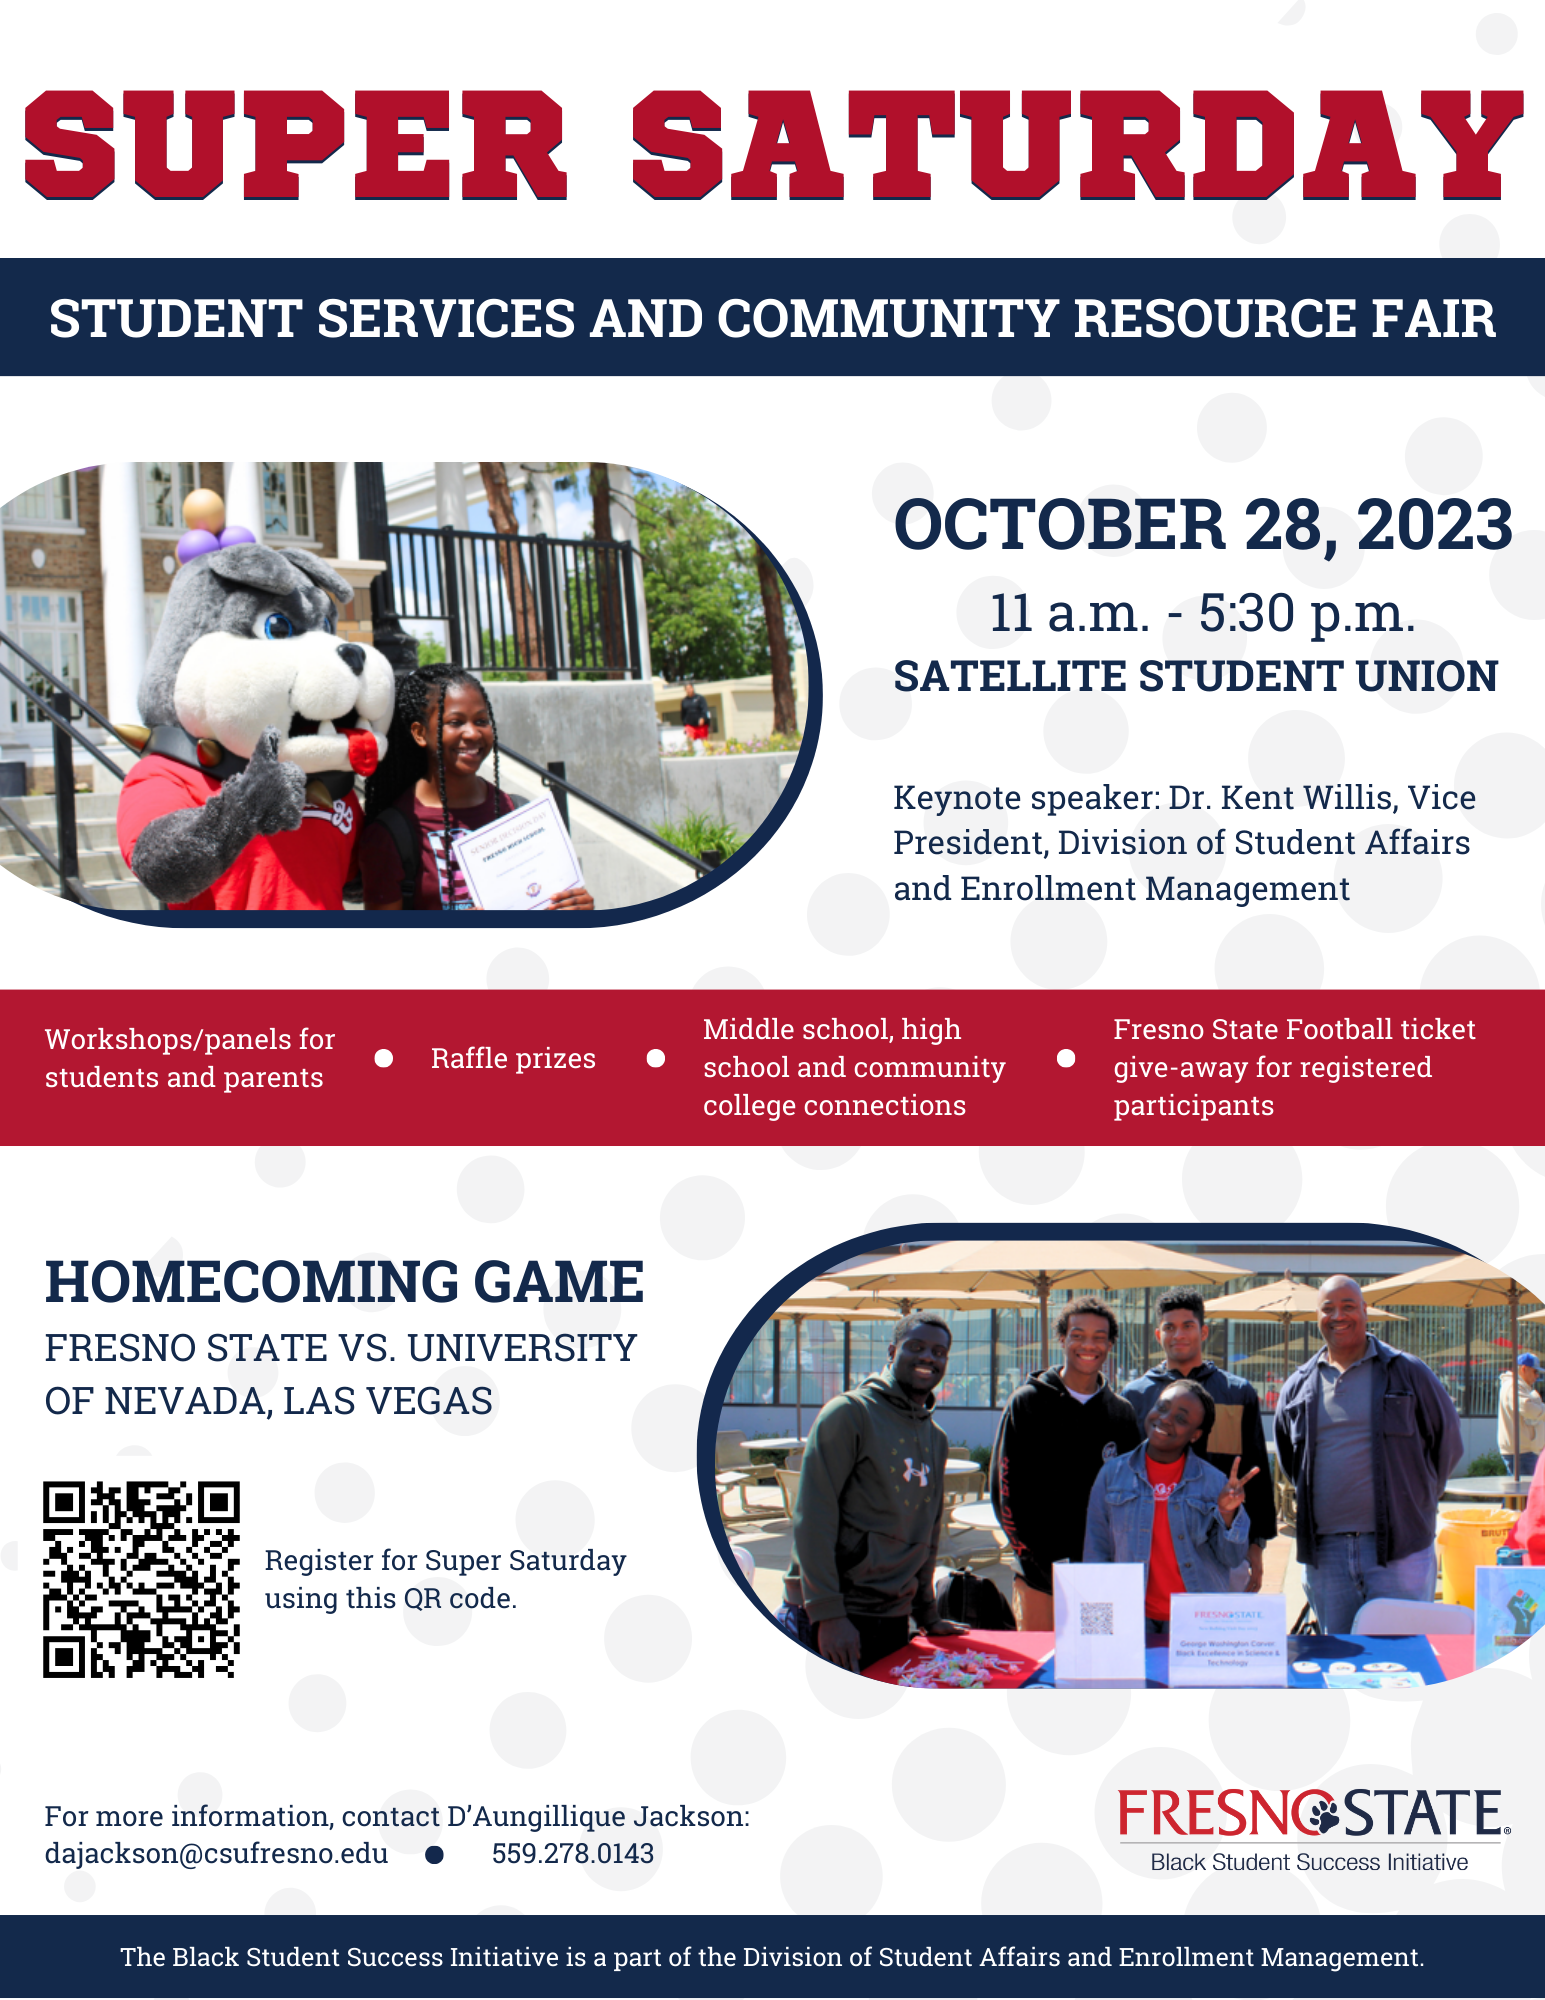 save the date flyer for super saturday on saturday, october 28, 2023 in the satellite student union from 11 a.m. to 5:30 p.m.